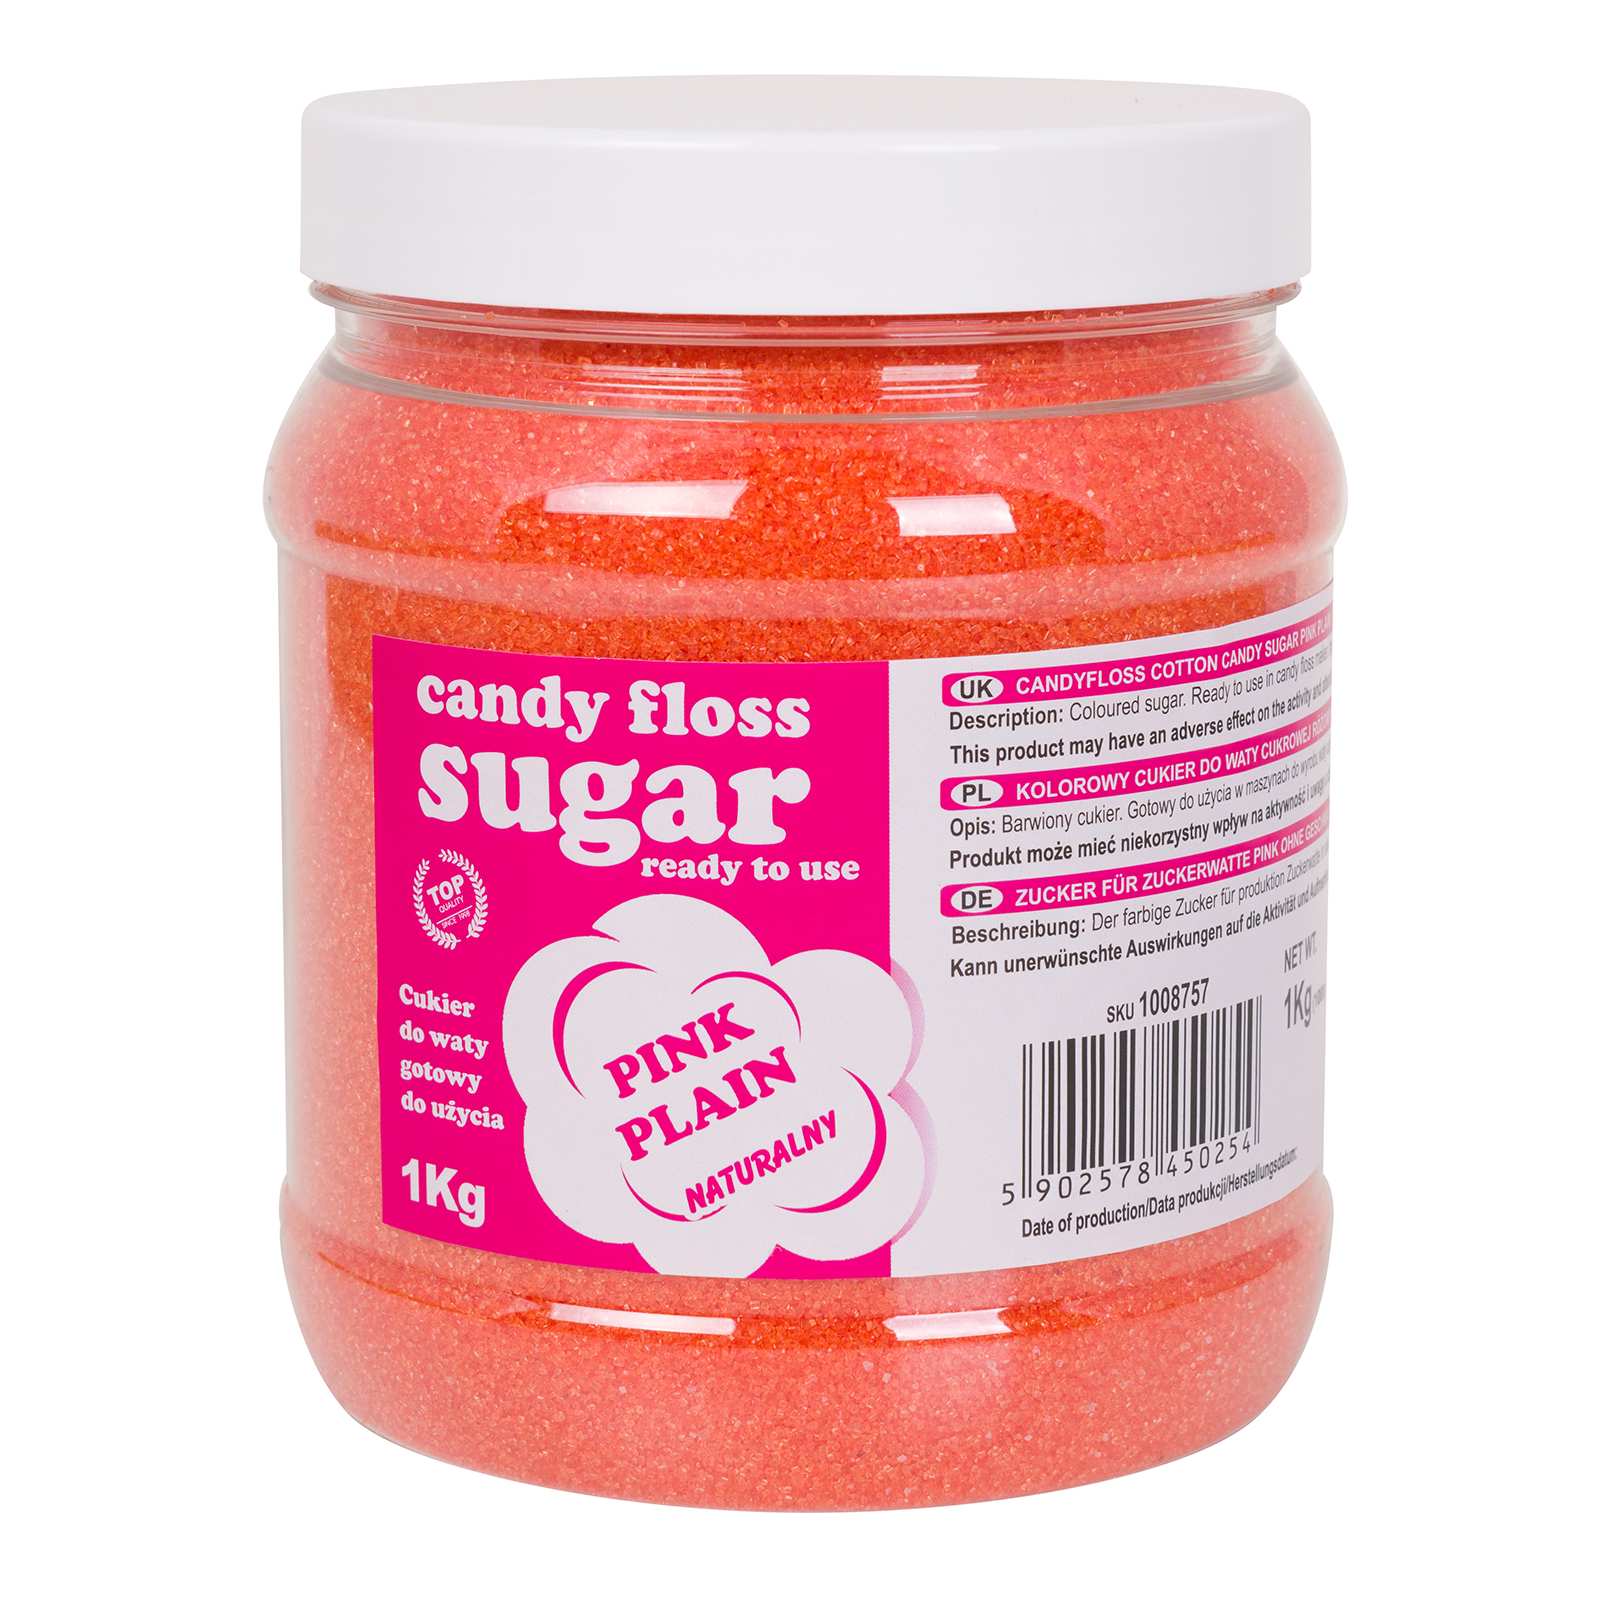 Cotton Candy Flossugar Ready To Use 1kg Fun Food Consumables 1420